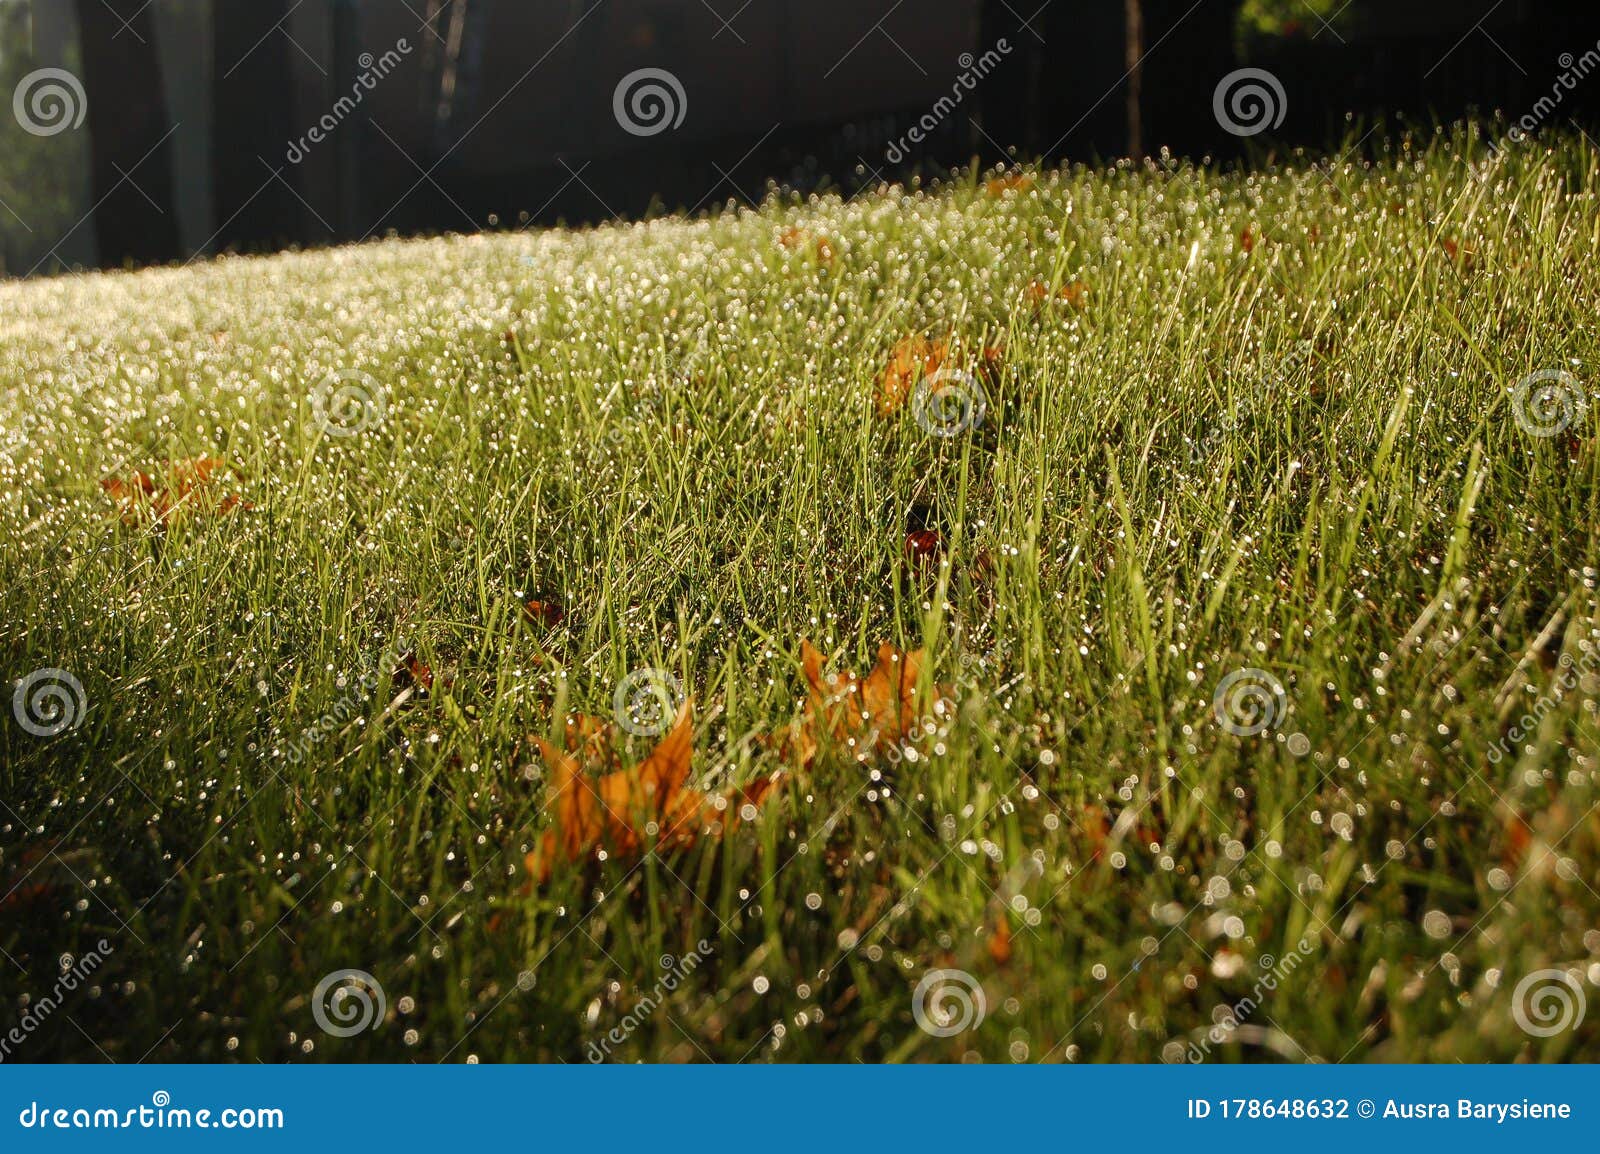 Background of a Dewy Grass in a Sunny Morning Stock Photo - Image of